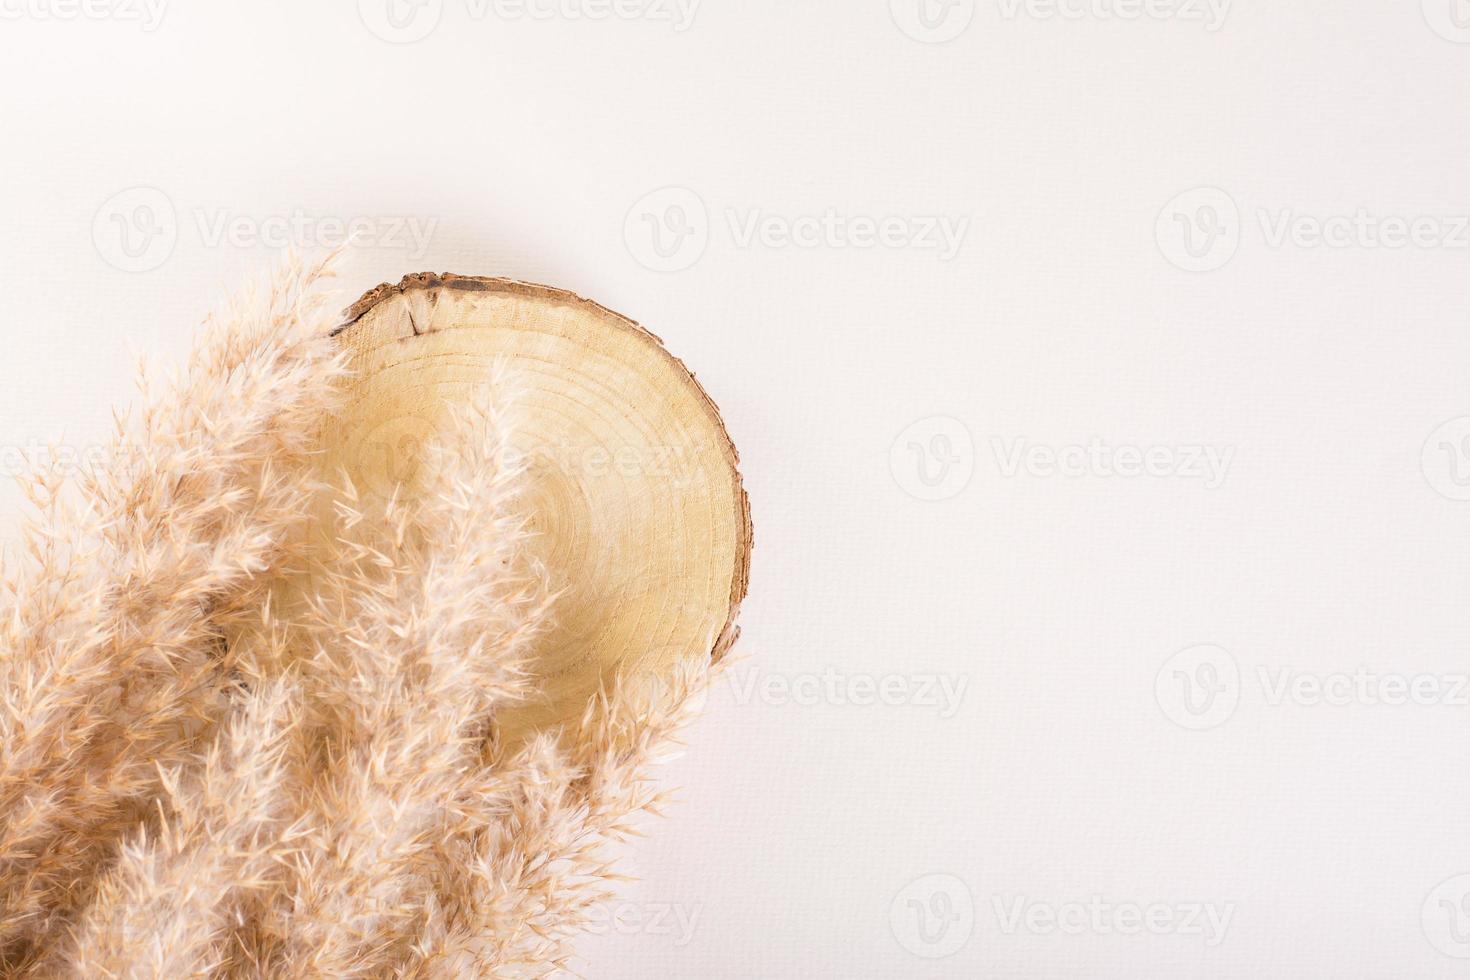 Natural mock-up with cut ofv tree and ears of grass on a light background. Top view photo